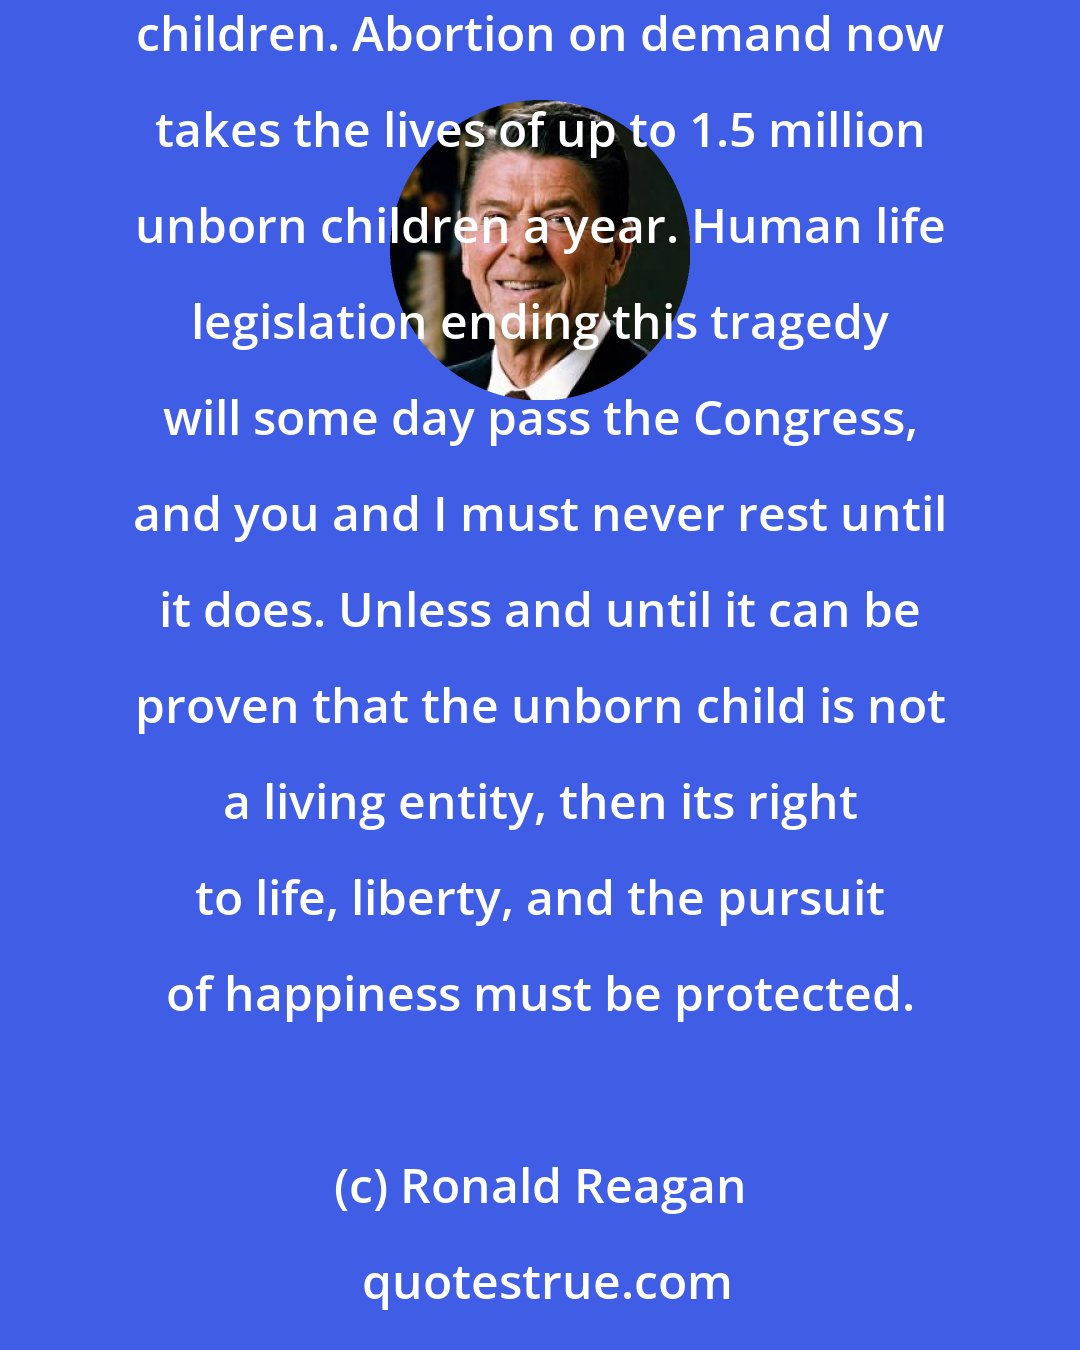 Ronald Reagan: More than a decade ago, a Supreme Court decision literally wiped off the books of fifty states statutes protecting the rights of unborn children. Abortion on demand now takes the lives of up to 1.5 million unborn children a year. Human life legislation ending this tragedy will some day pass the Congress, and you and I must never rest until it does. Unless and until it can be proven that the unborn child is not a living entity, then its right to life, liberty, and the pursuit of happiness must be protected.